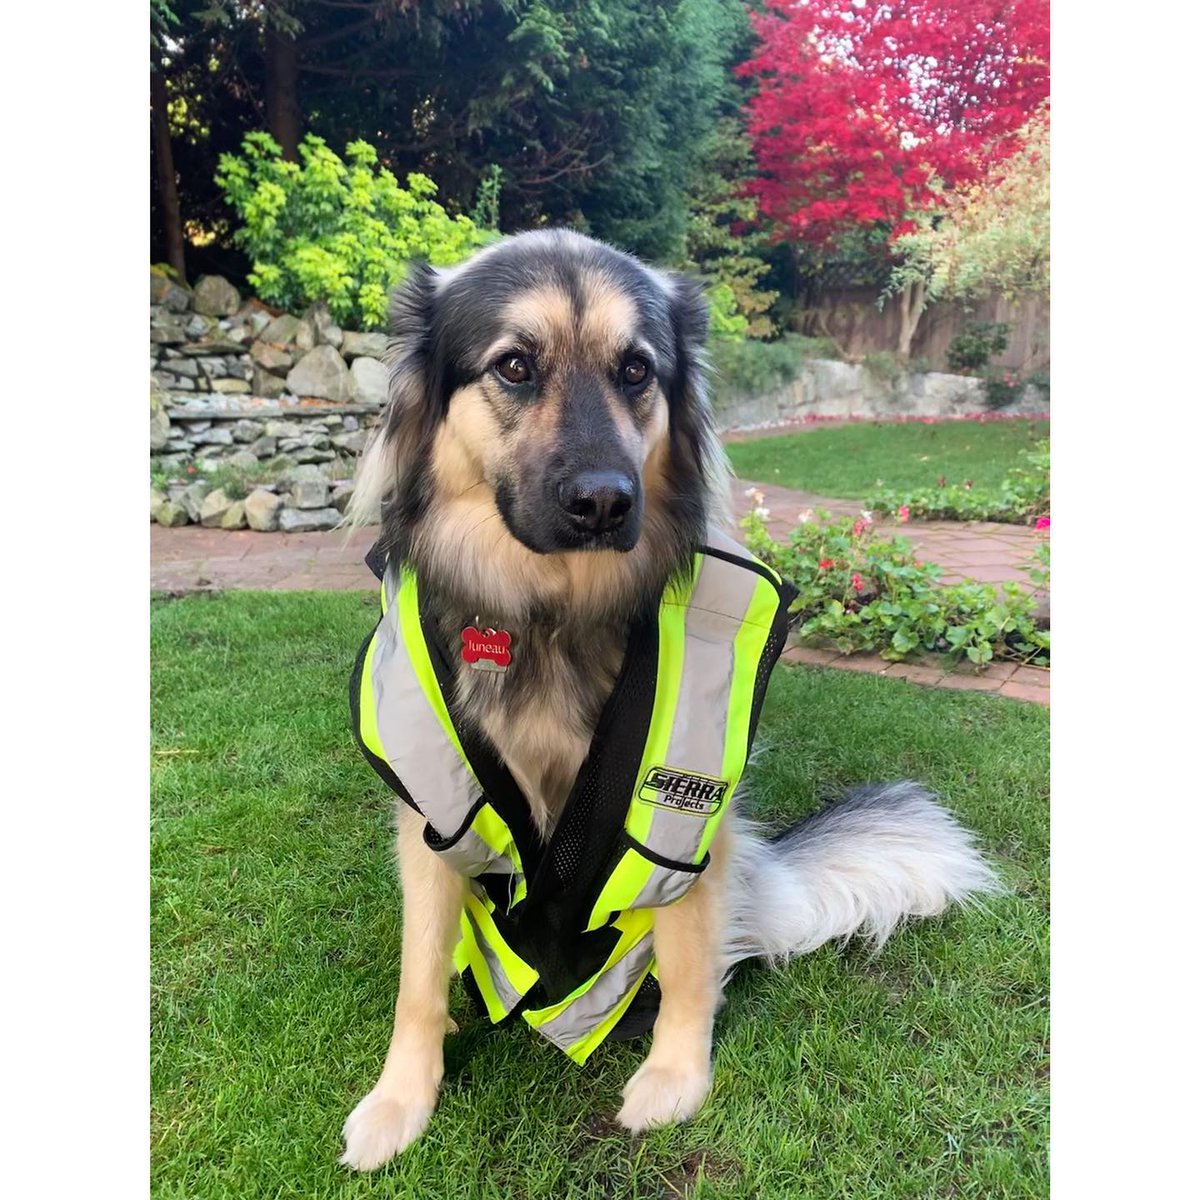 Juneau is doing a site visit today to make sure everyone is wearing their safety gear 🐶 🚧

#dog #officedog #dogs #safety #safetyvest #construction #buildingupgrade #buildingmaintenance #designbuild #tenantimprovement #contractor #sierraprojects